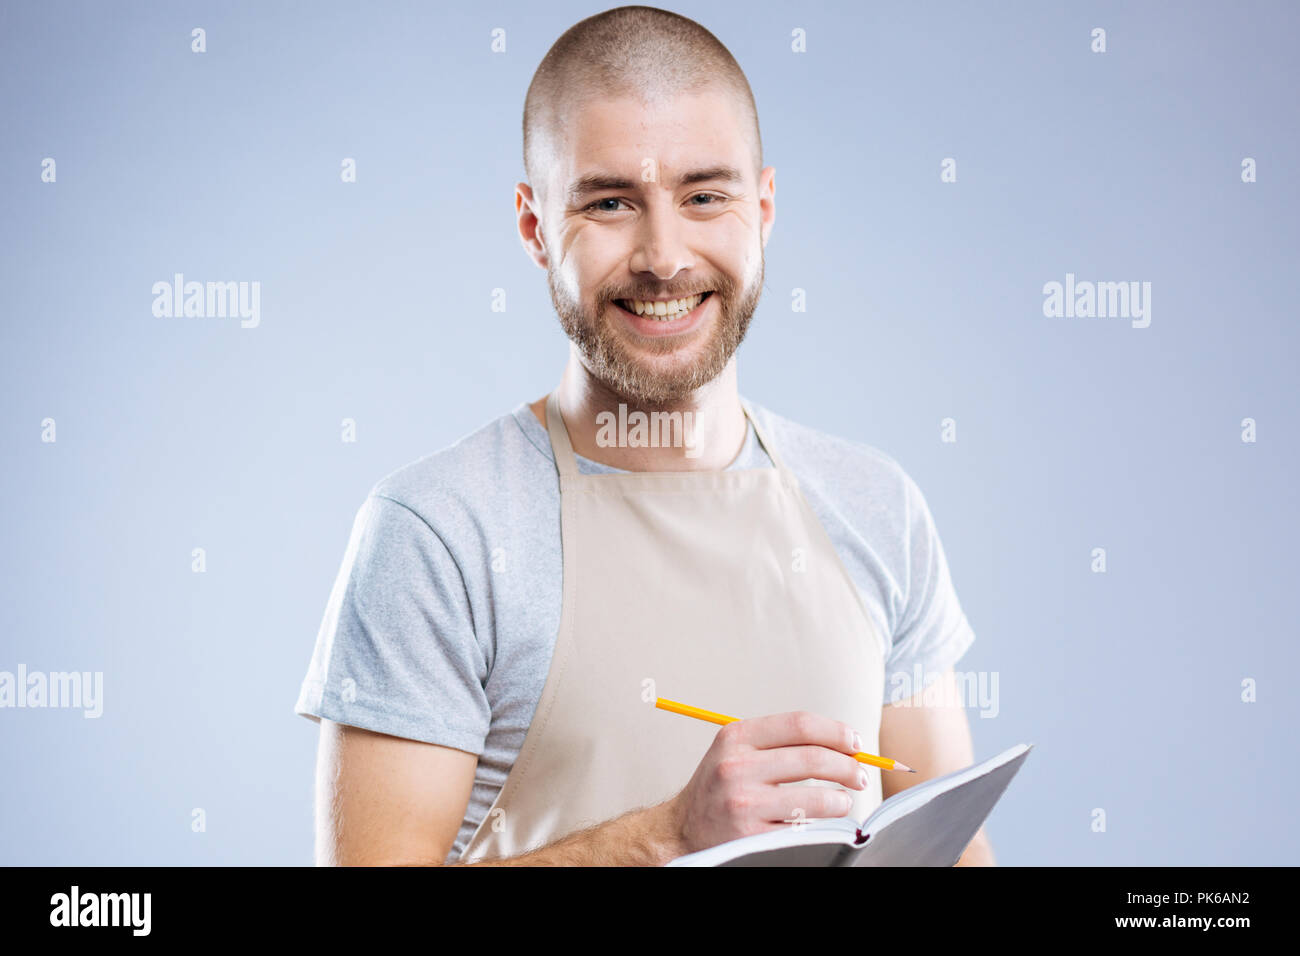 Cheerful nice man being ready to take notes Stock Photo